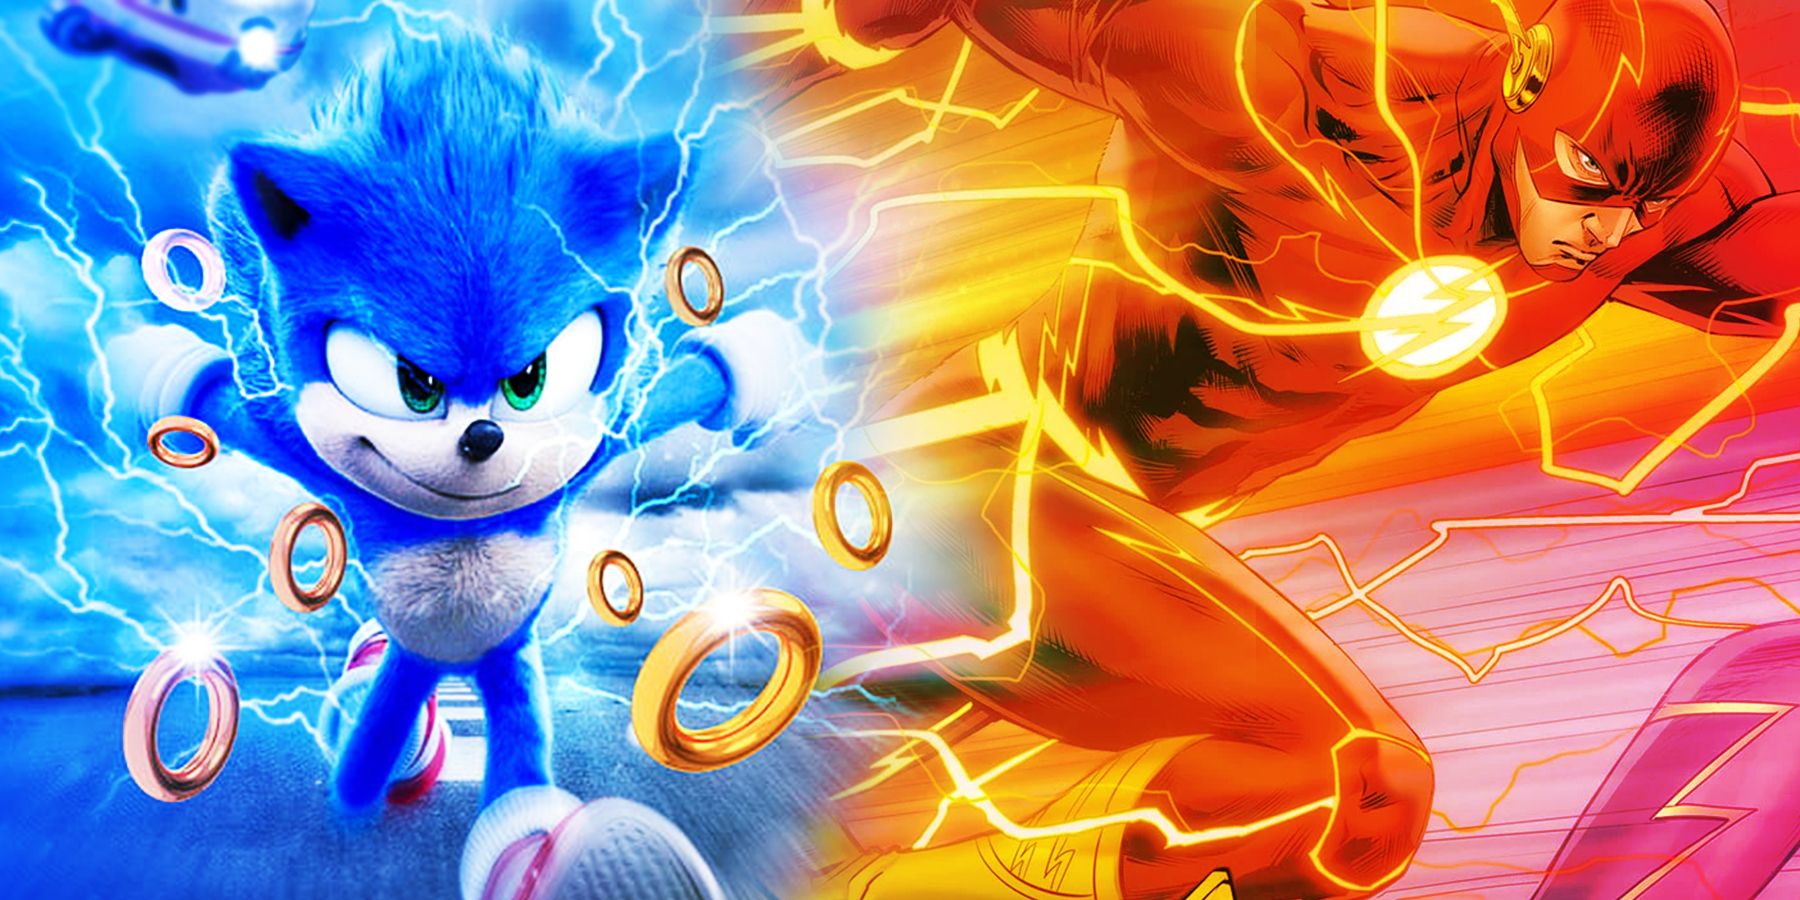 A split image of sonic the hedgehog and the flash